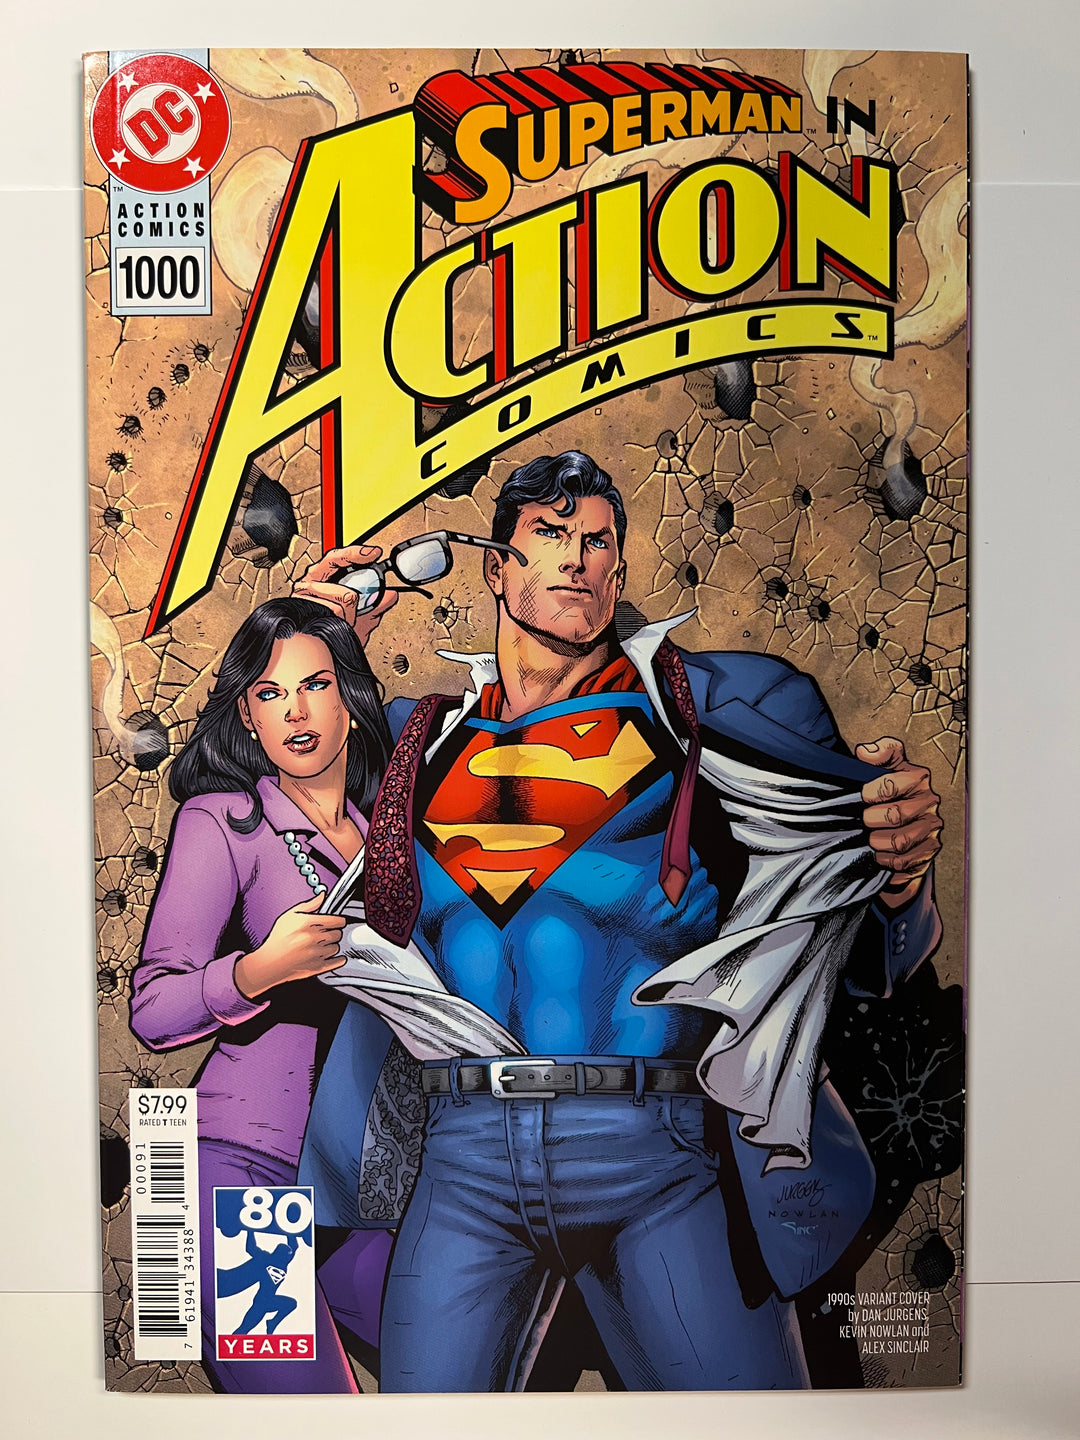 Action Comics #1000 '1990s' Variant Cover DC 2018 NM